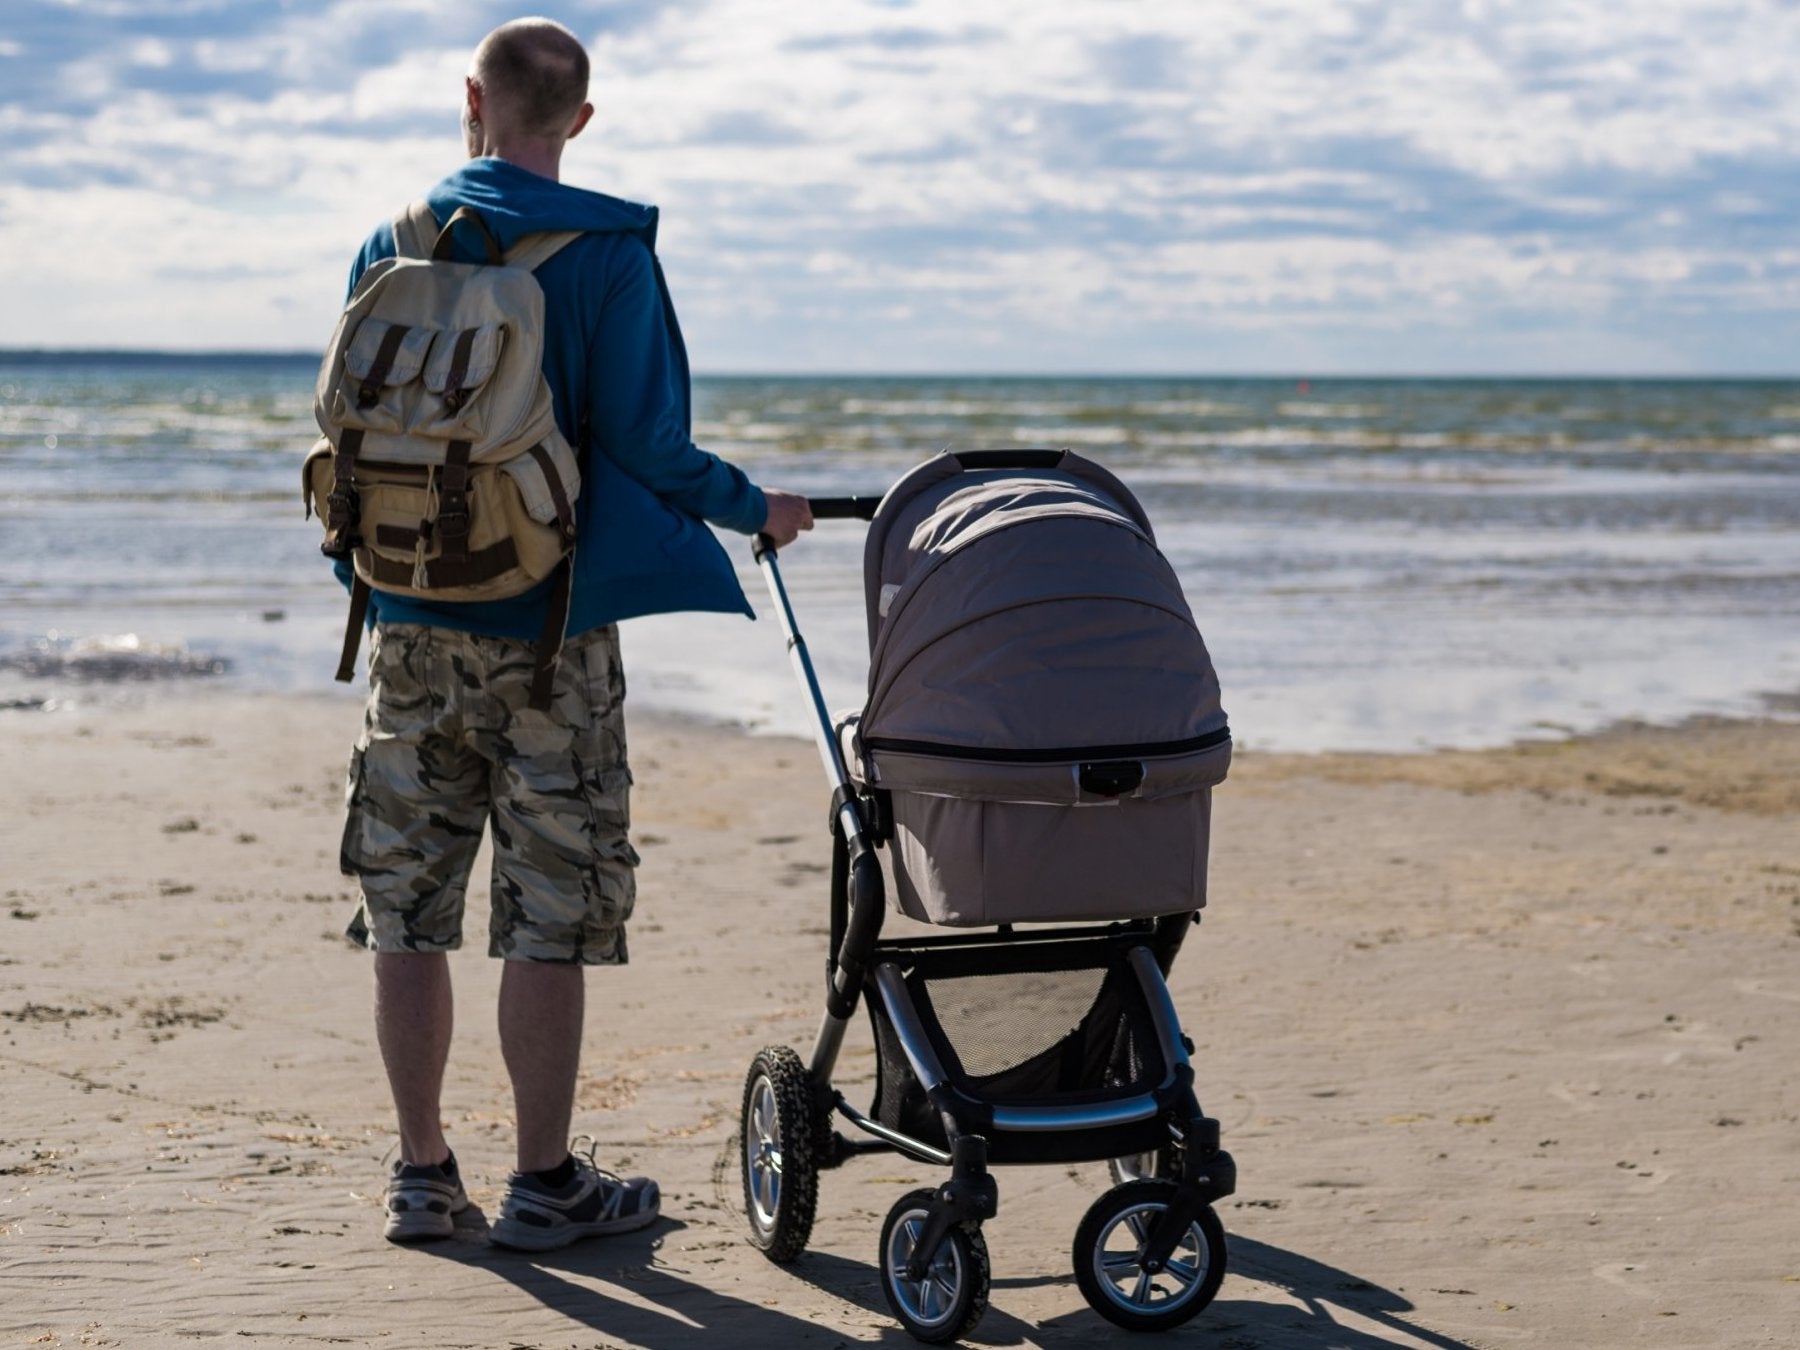 Just 9,200 new parents took up shared leave in 2018 out of more than 900,000 who were eligible